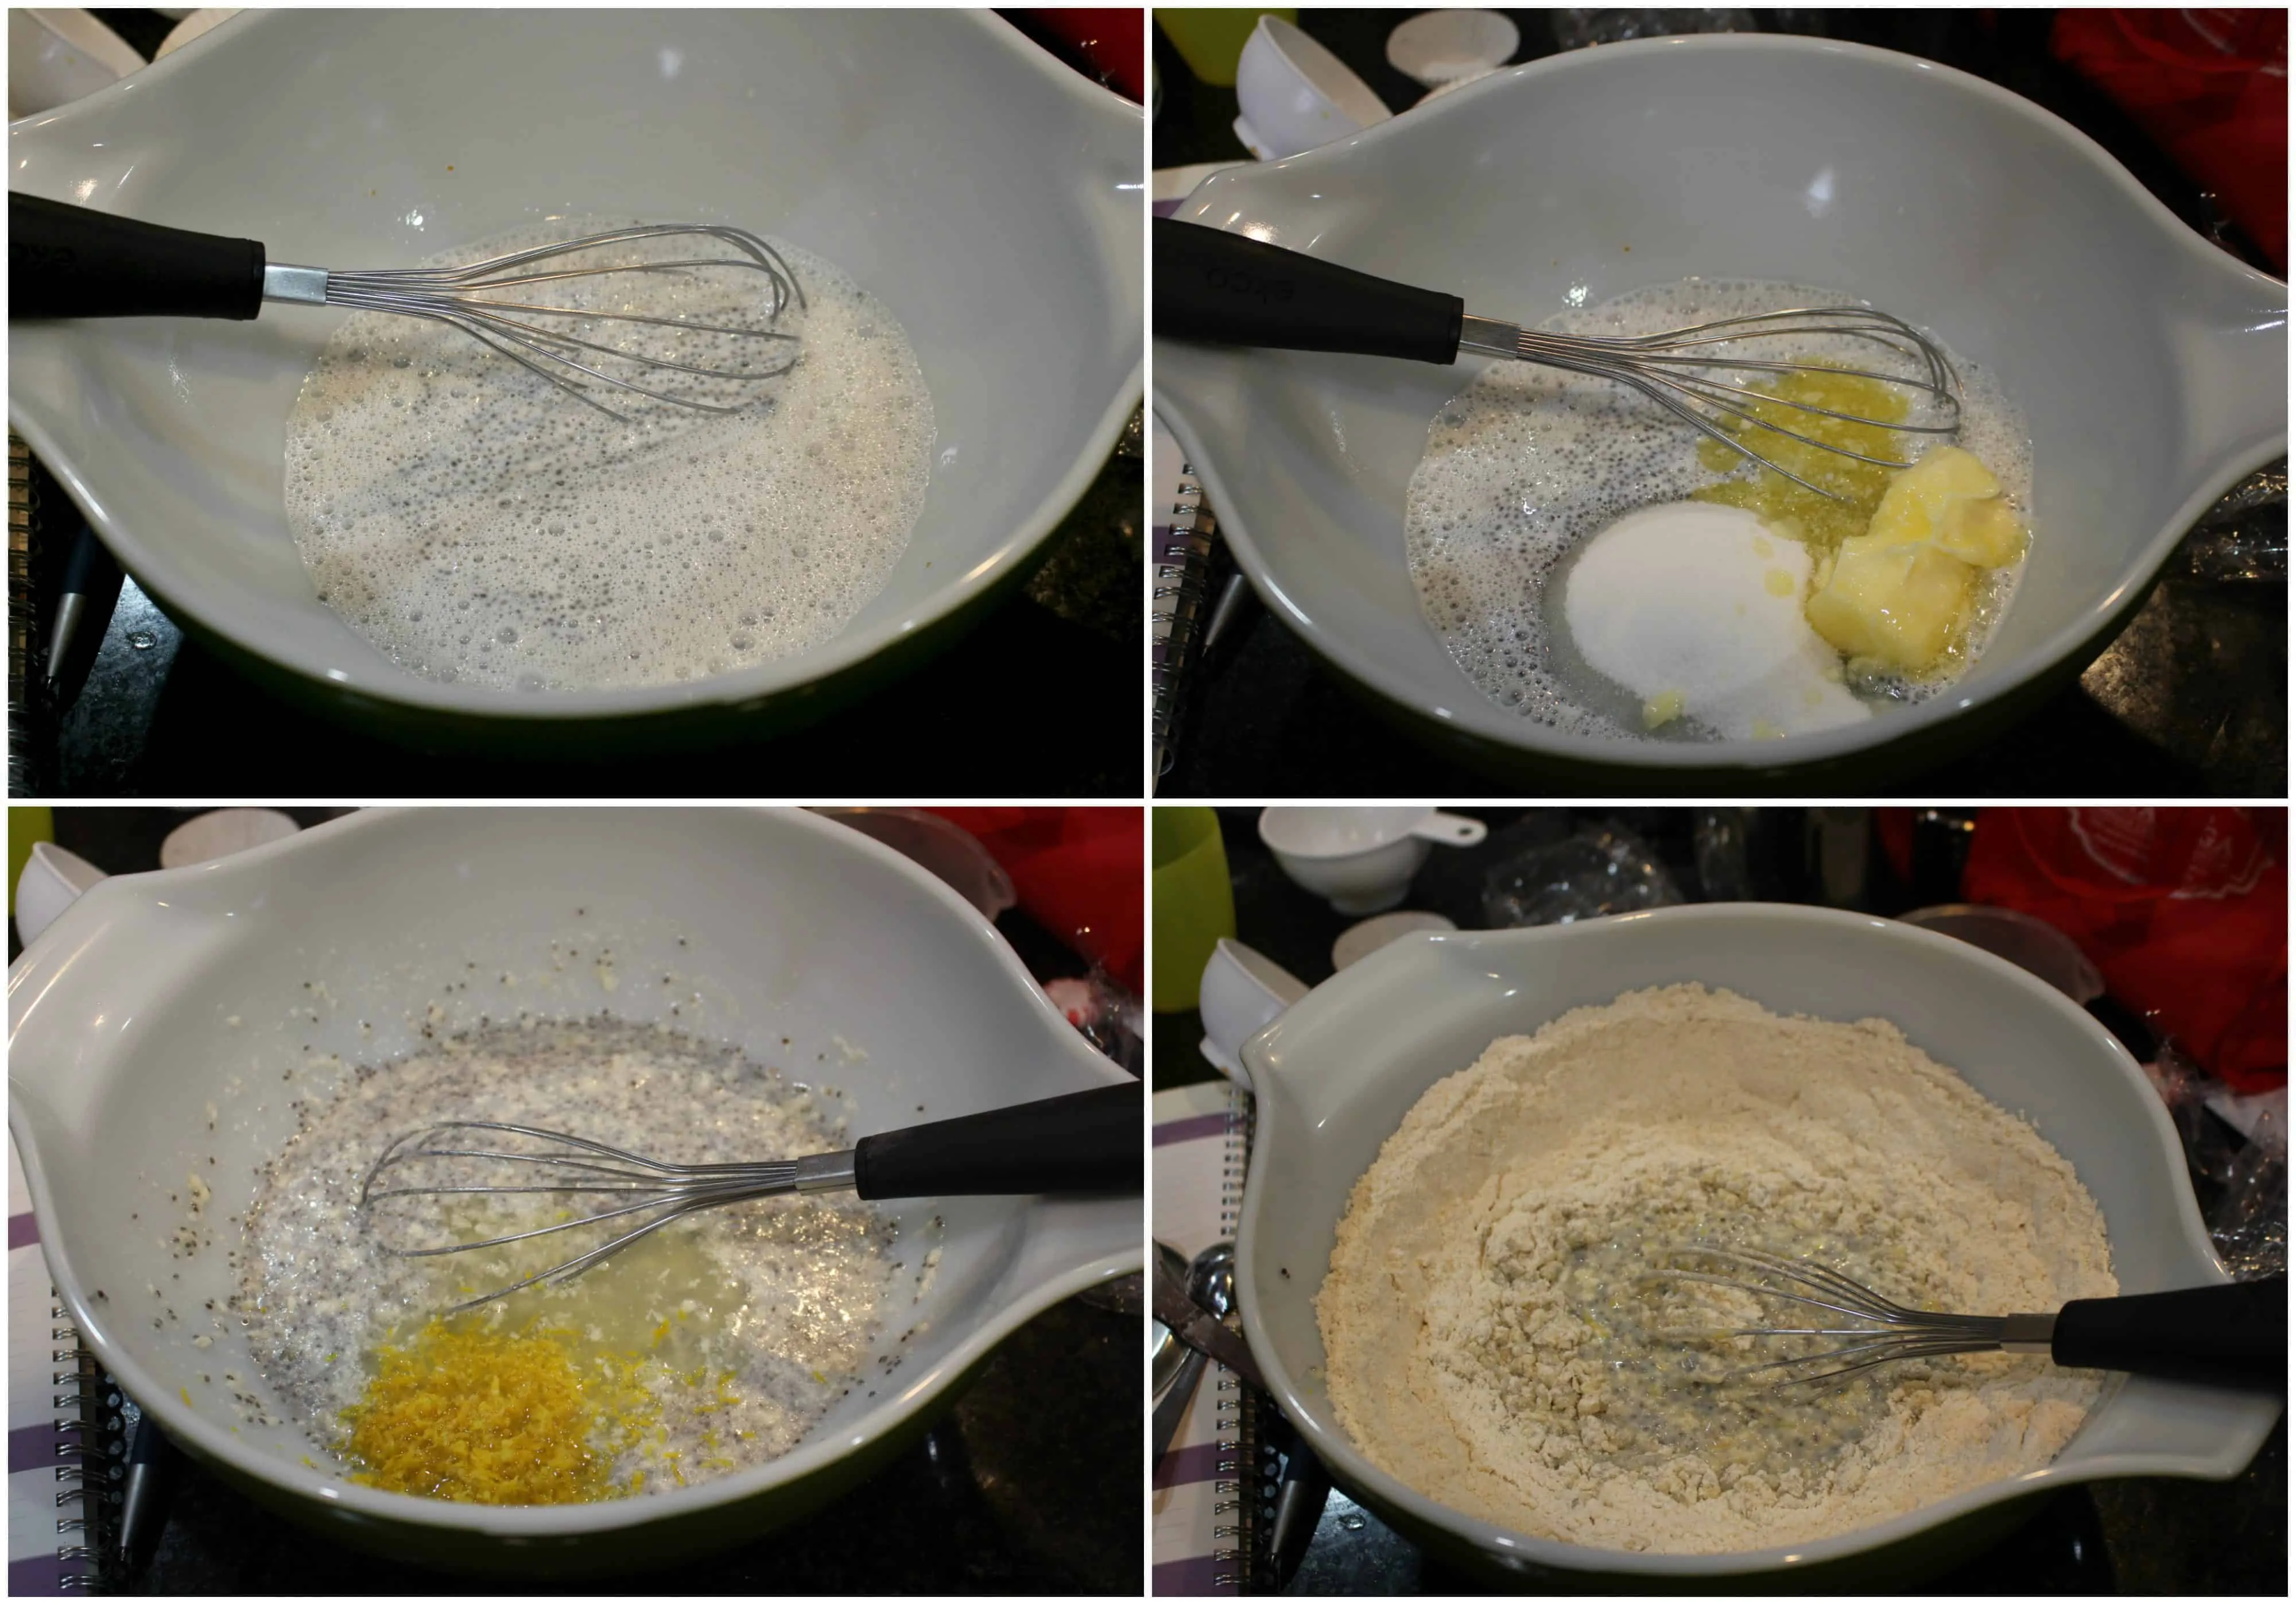 Process shots showing how to make muffin batter. 